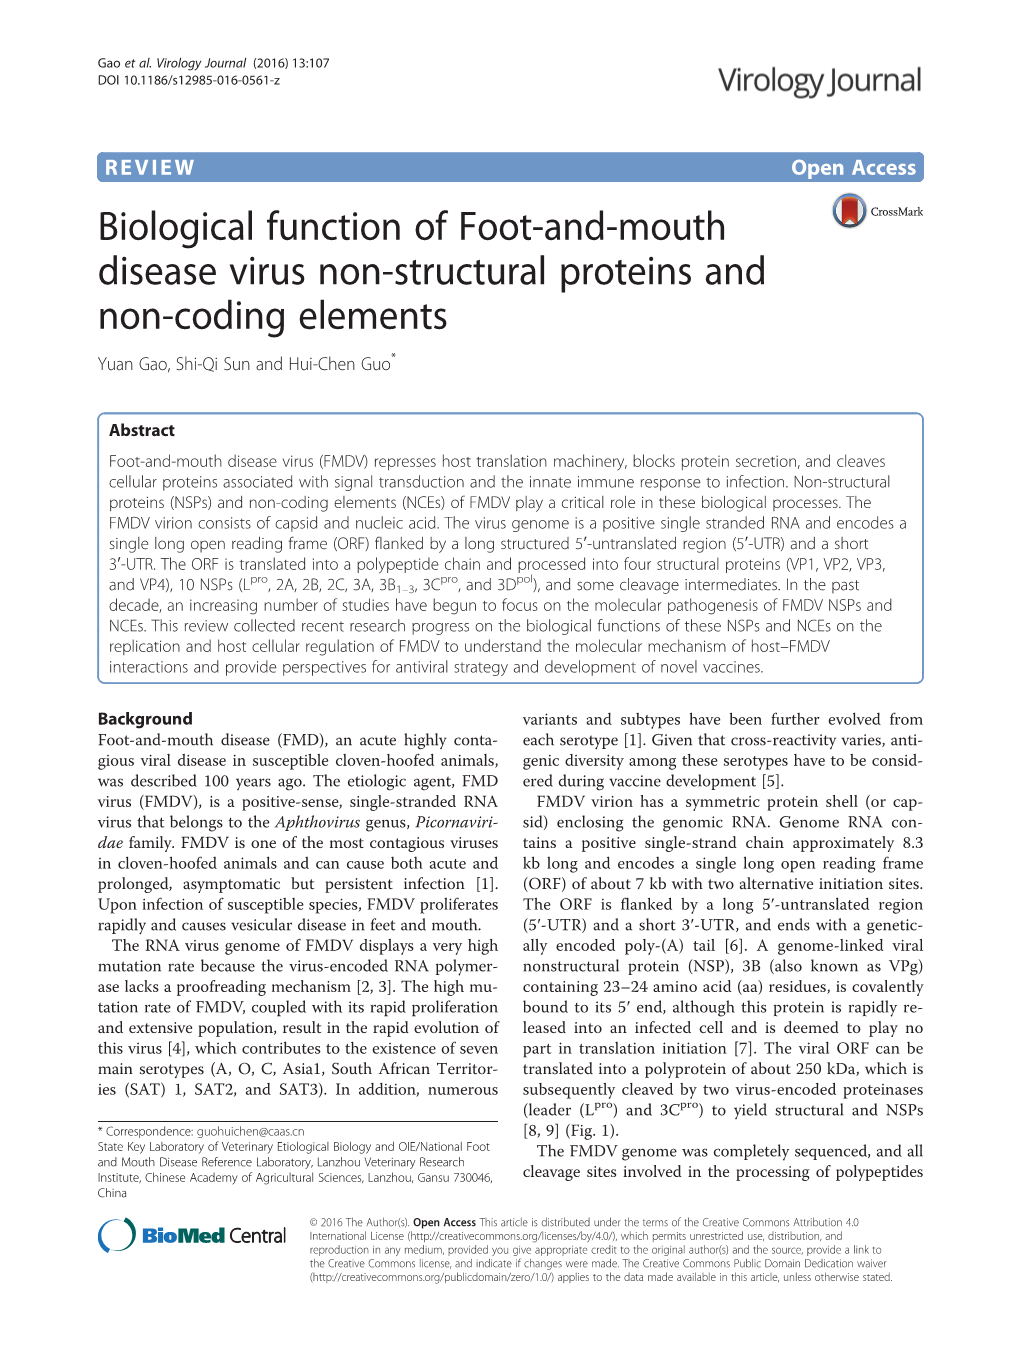 Biological Function of Foot-And-Mouth Disease Virus Non-Structural Proteins and Non-Coding Elements Yuan Gao, Shi-Qi Sun and Hui-Chen Guo*